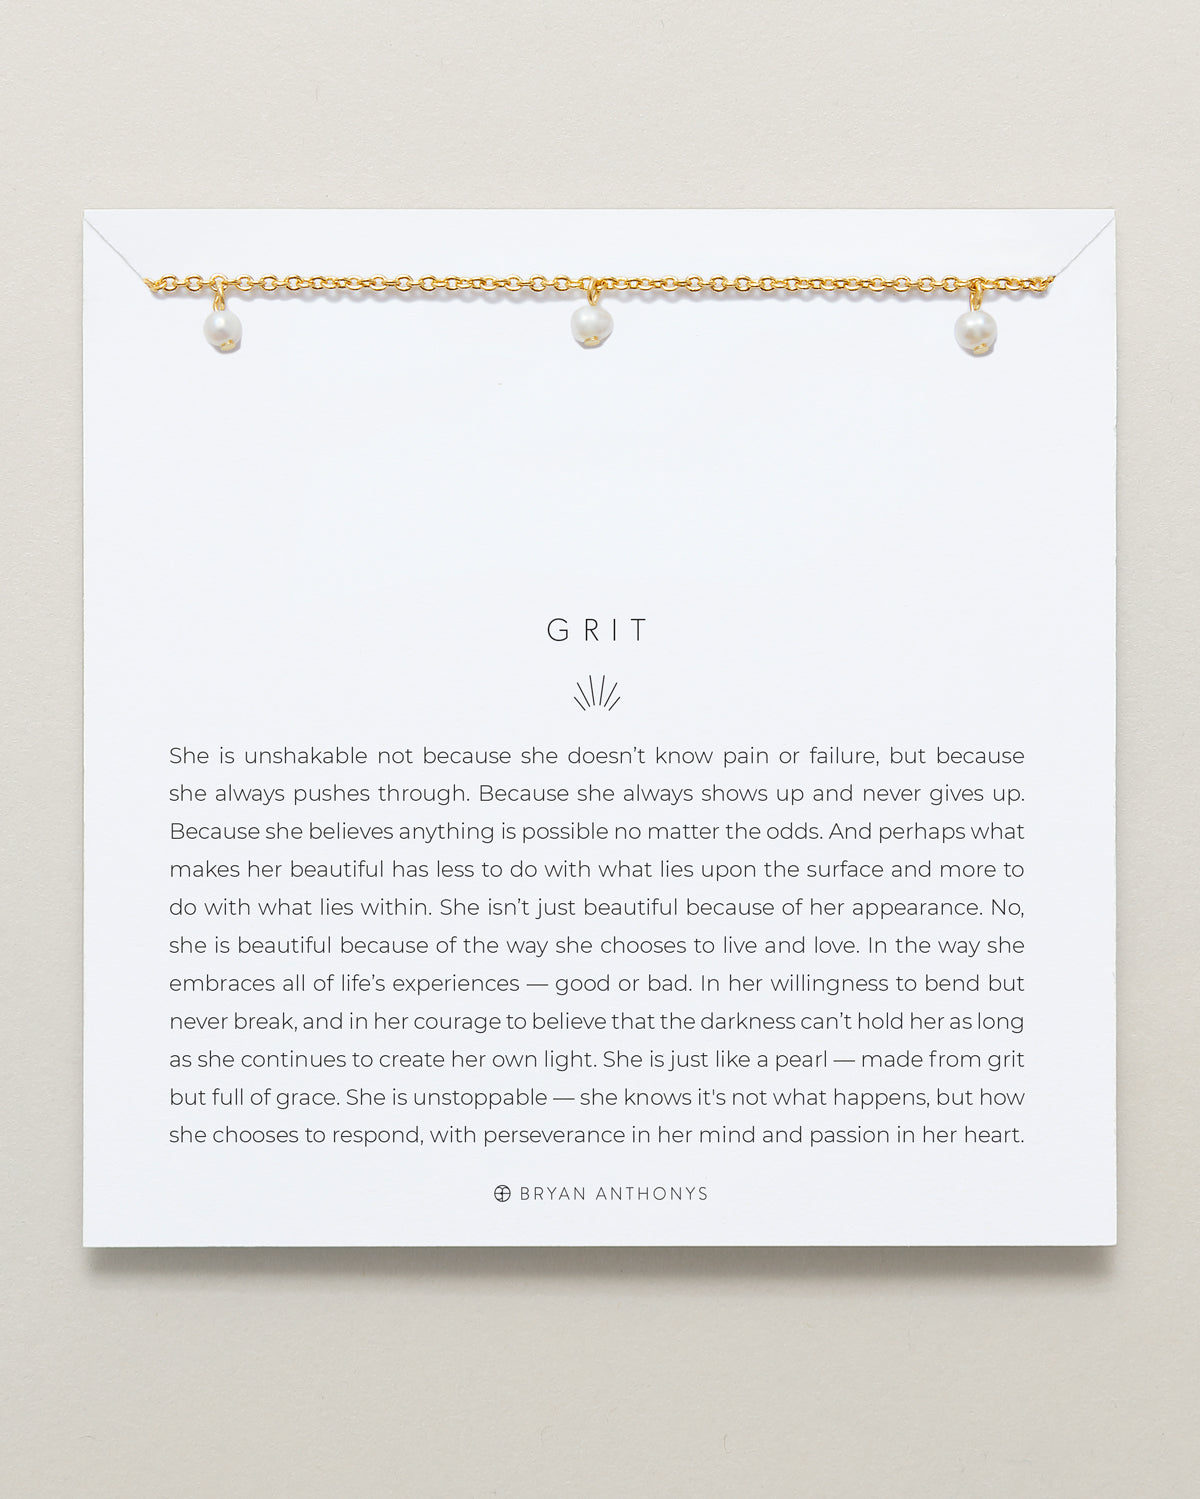 Bryan Anthonys Grit Gold Choker Necklace On Card